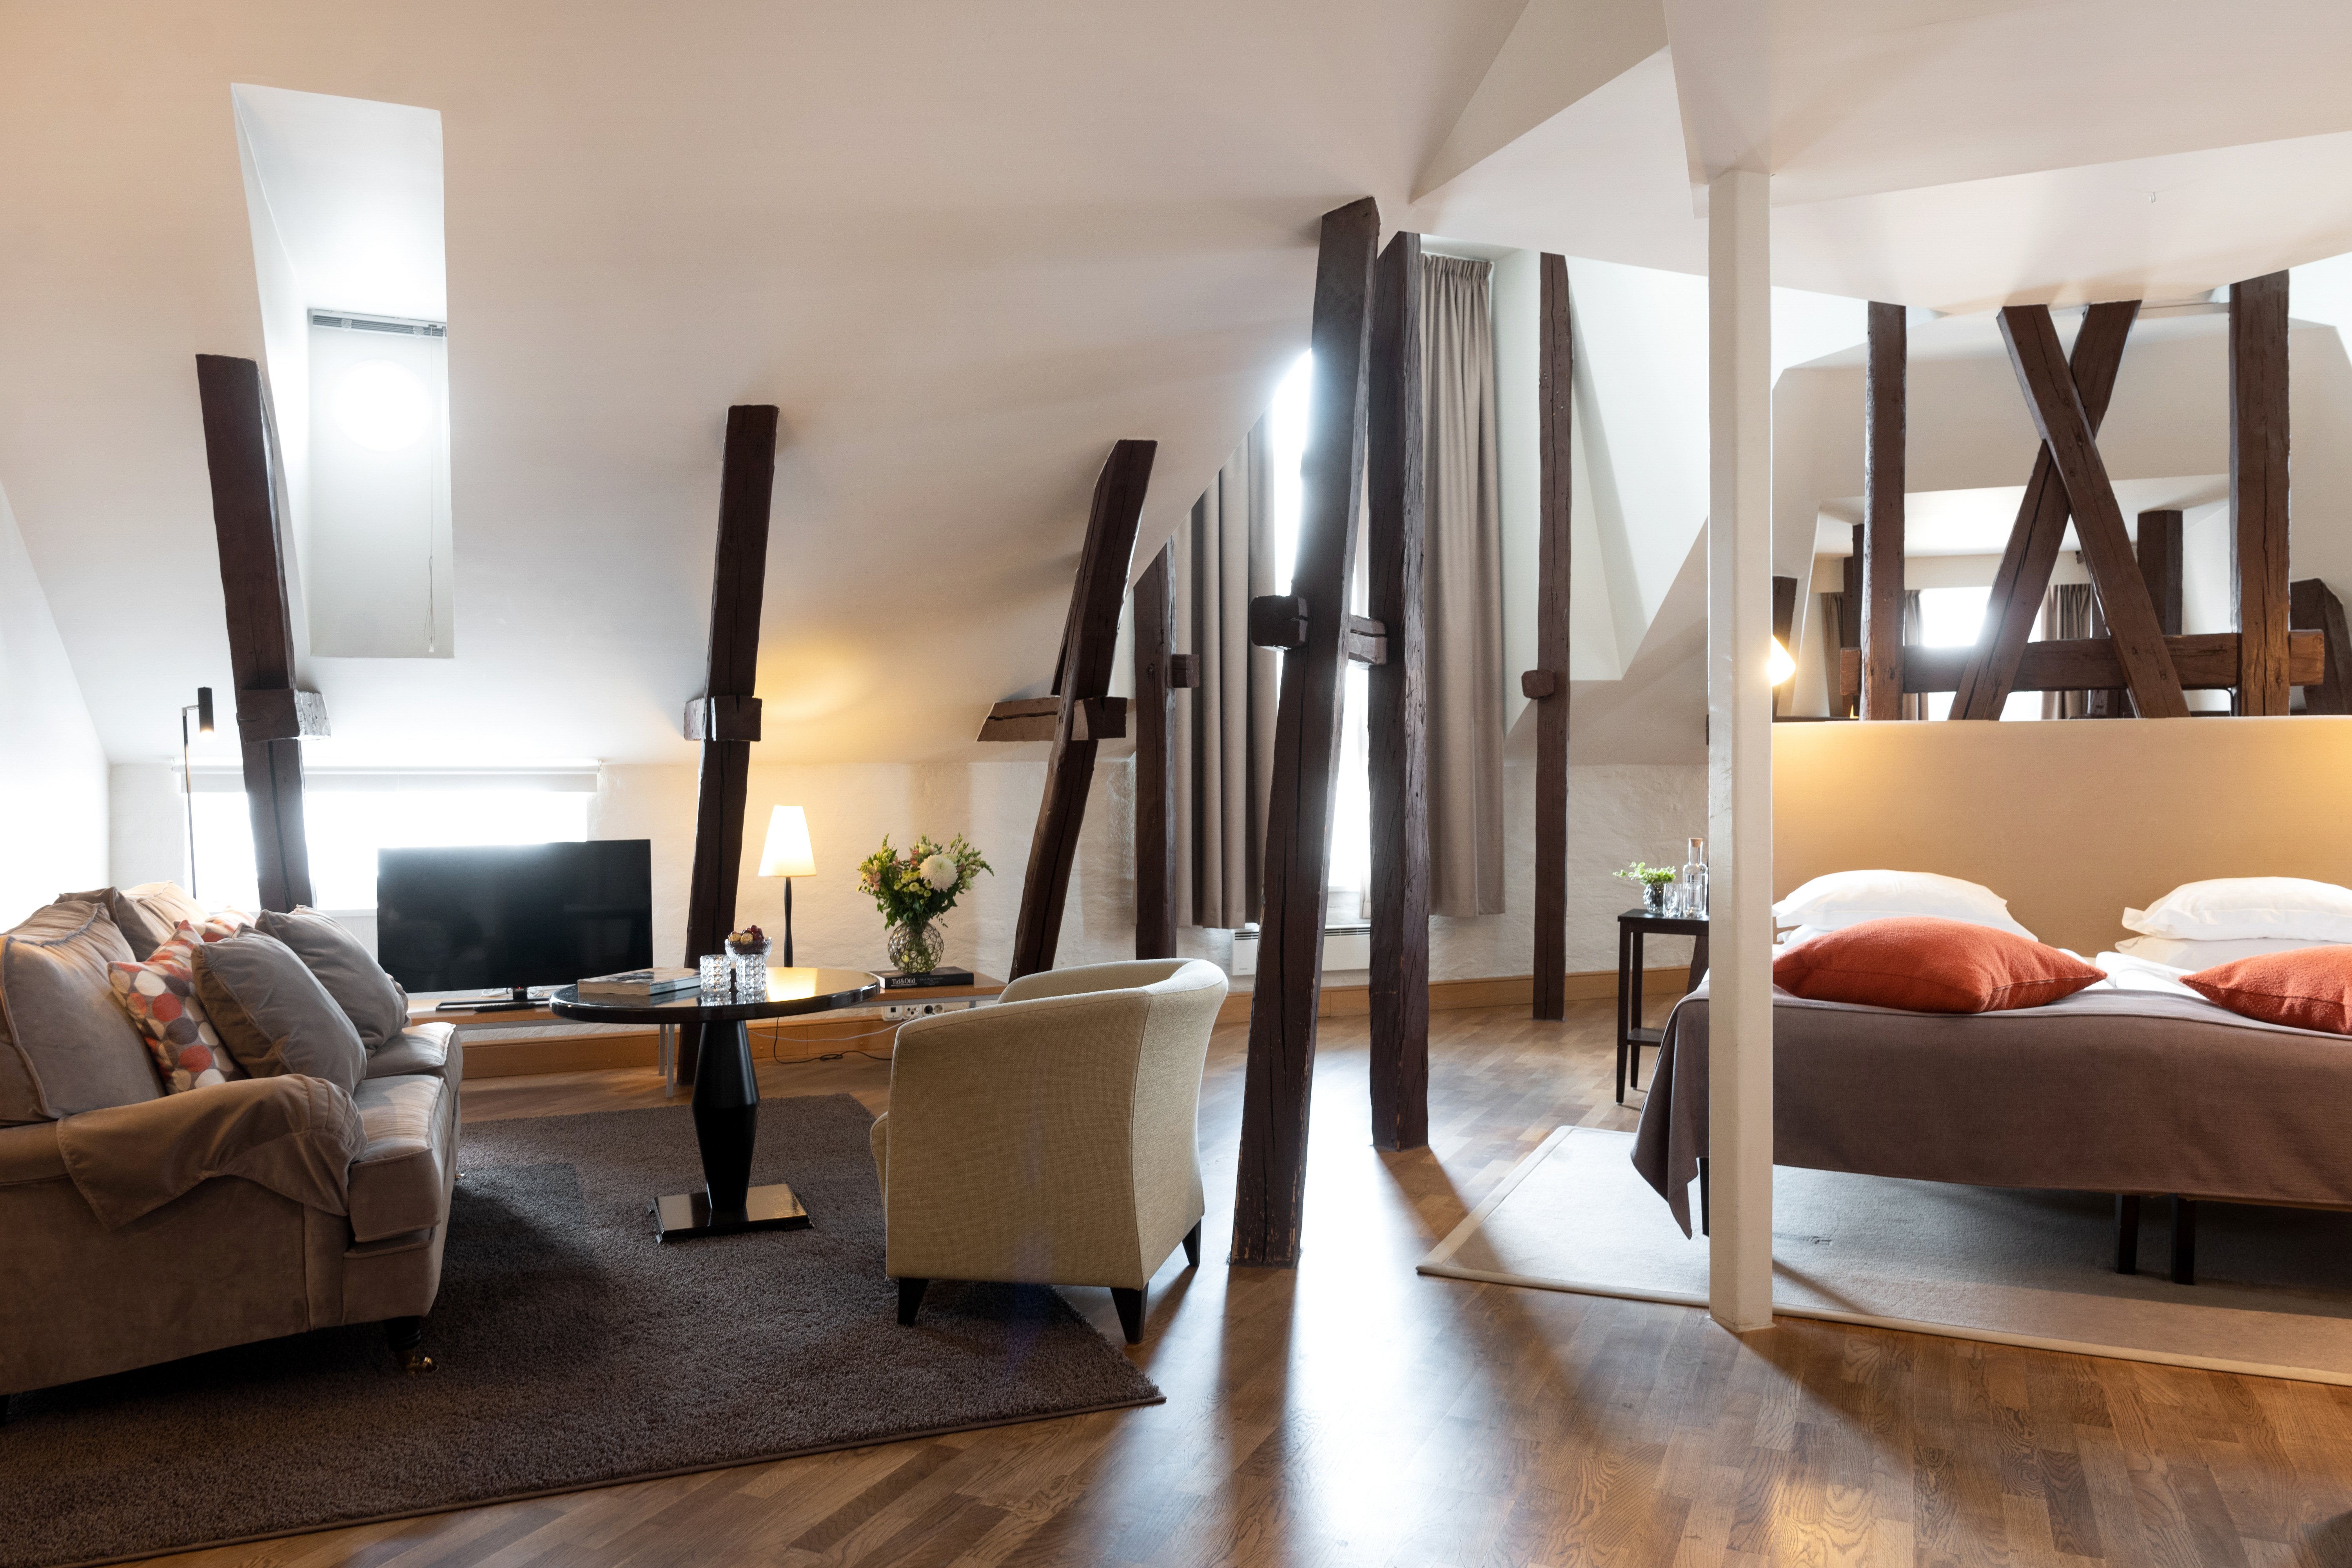 Hotel suite with bed, sofa group and wooden beams from the ceiling